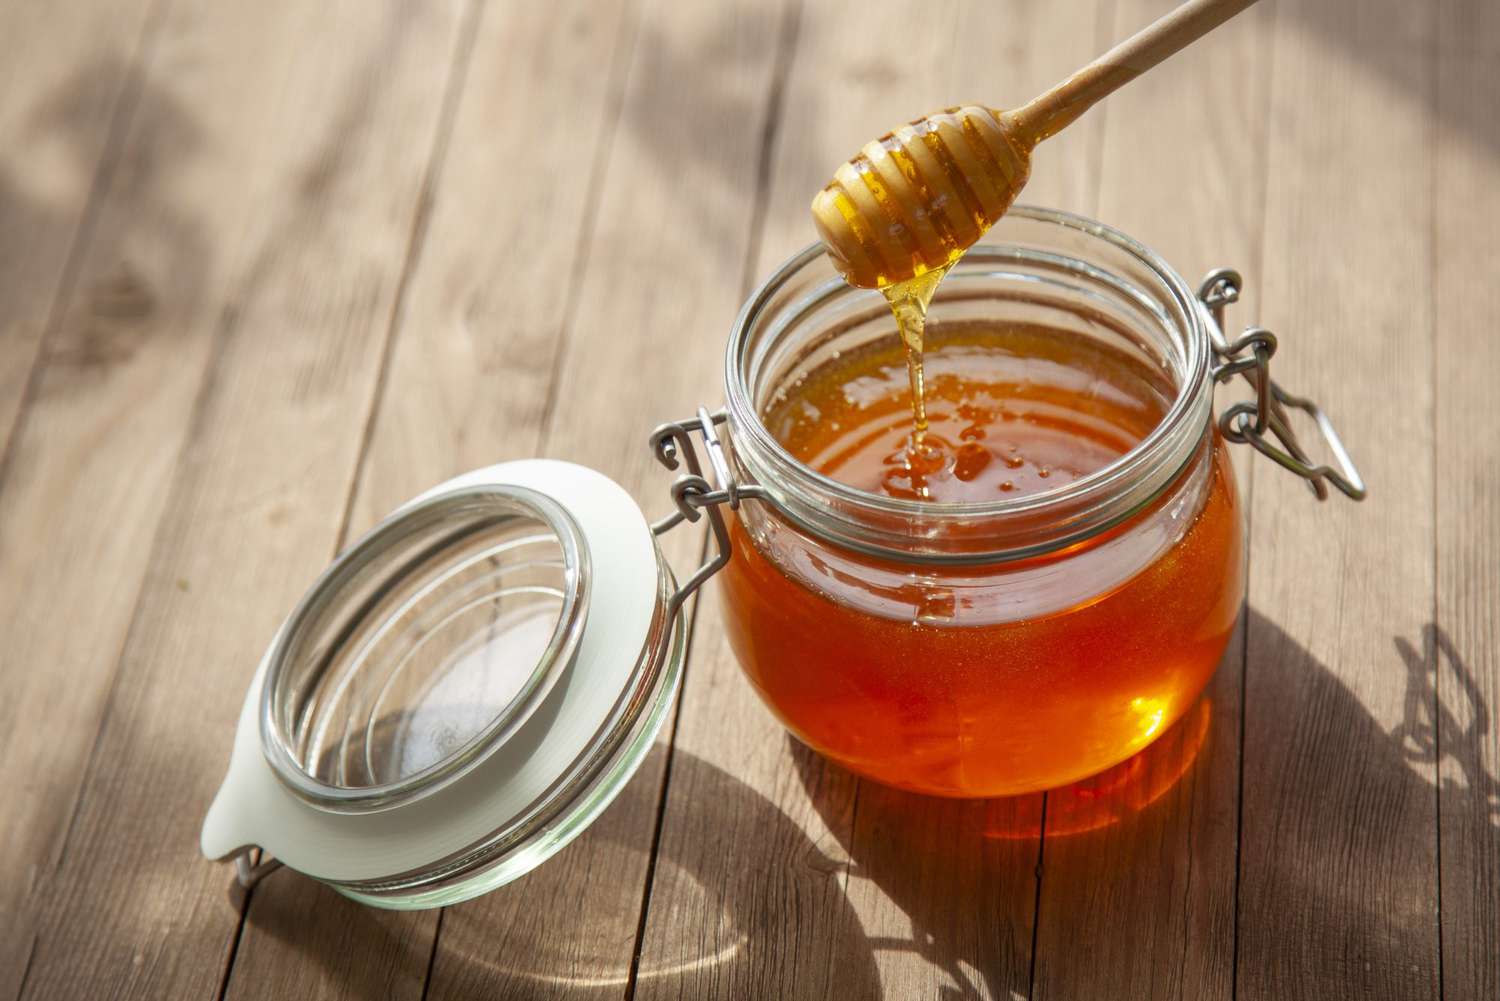 What Are the Health Benefits of Consuming Local Honey in Houston?